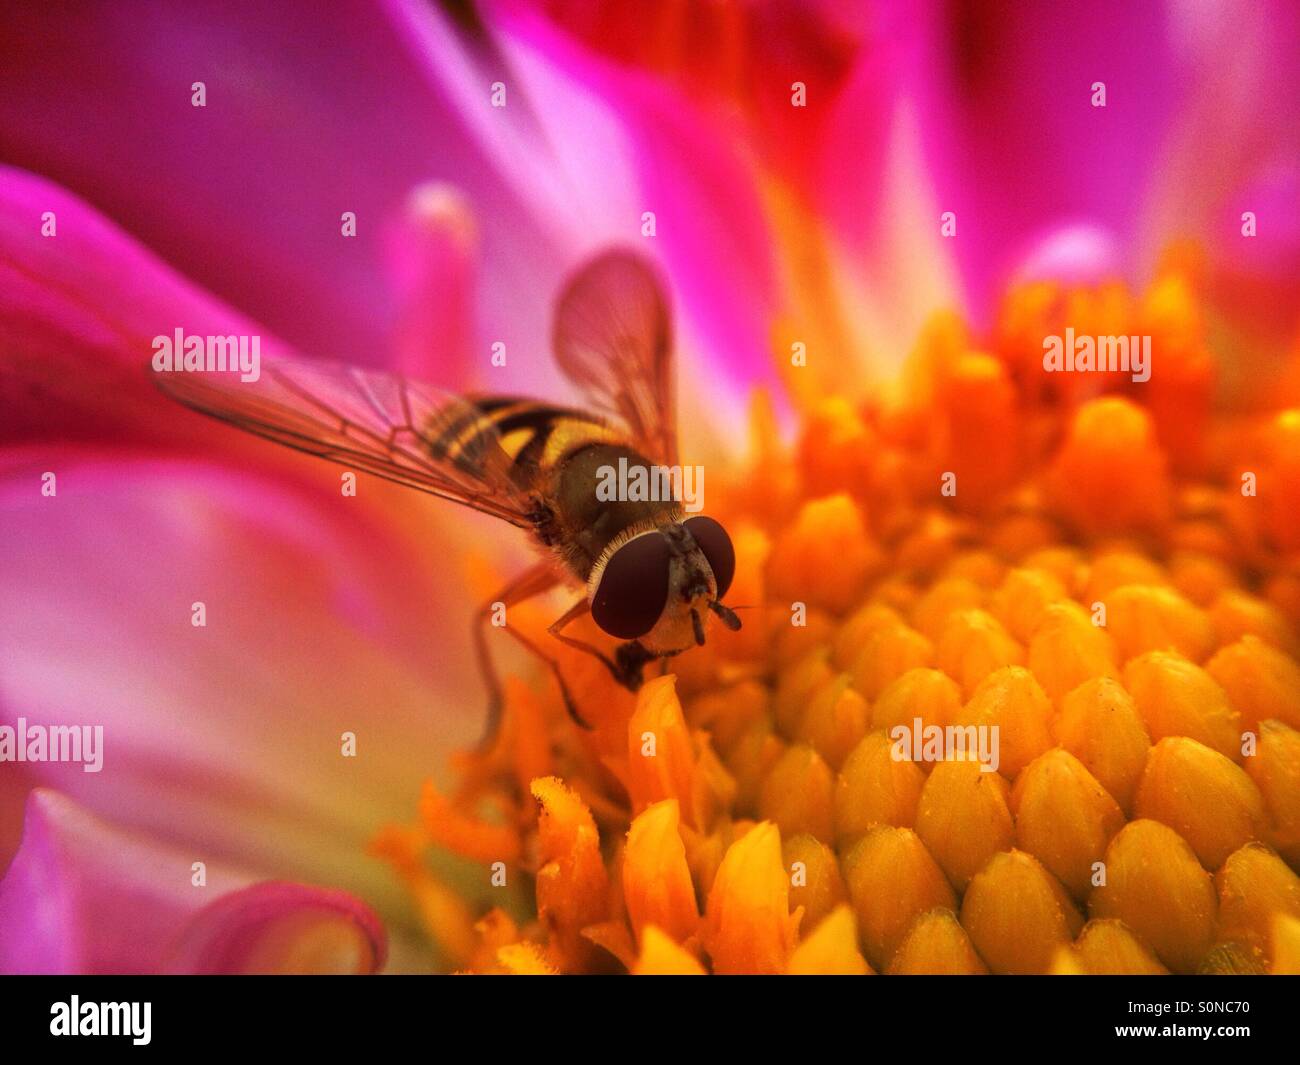 Hoverfly on cosmos flower Stock Photo